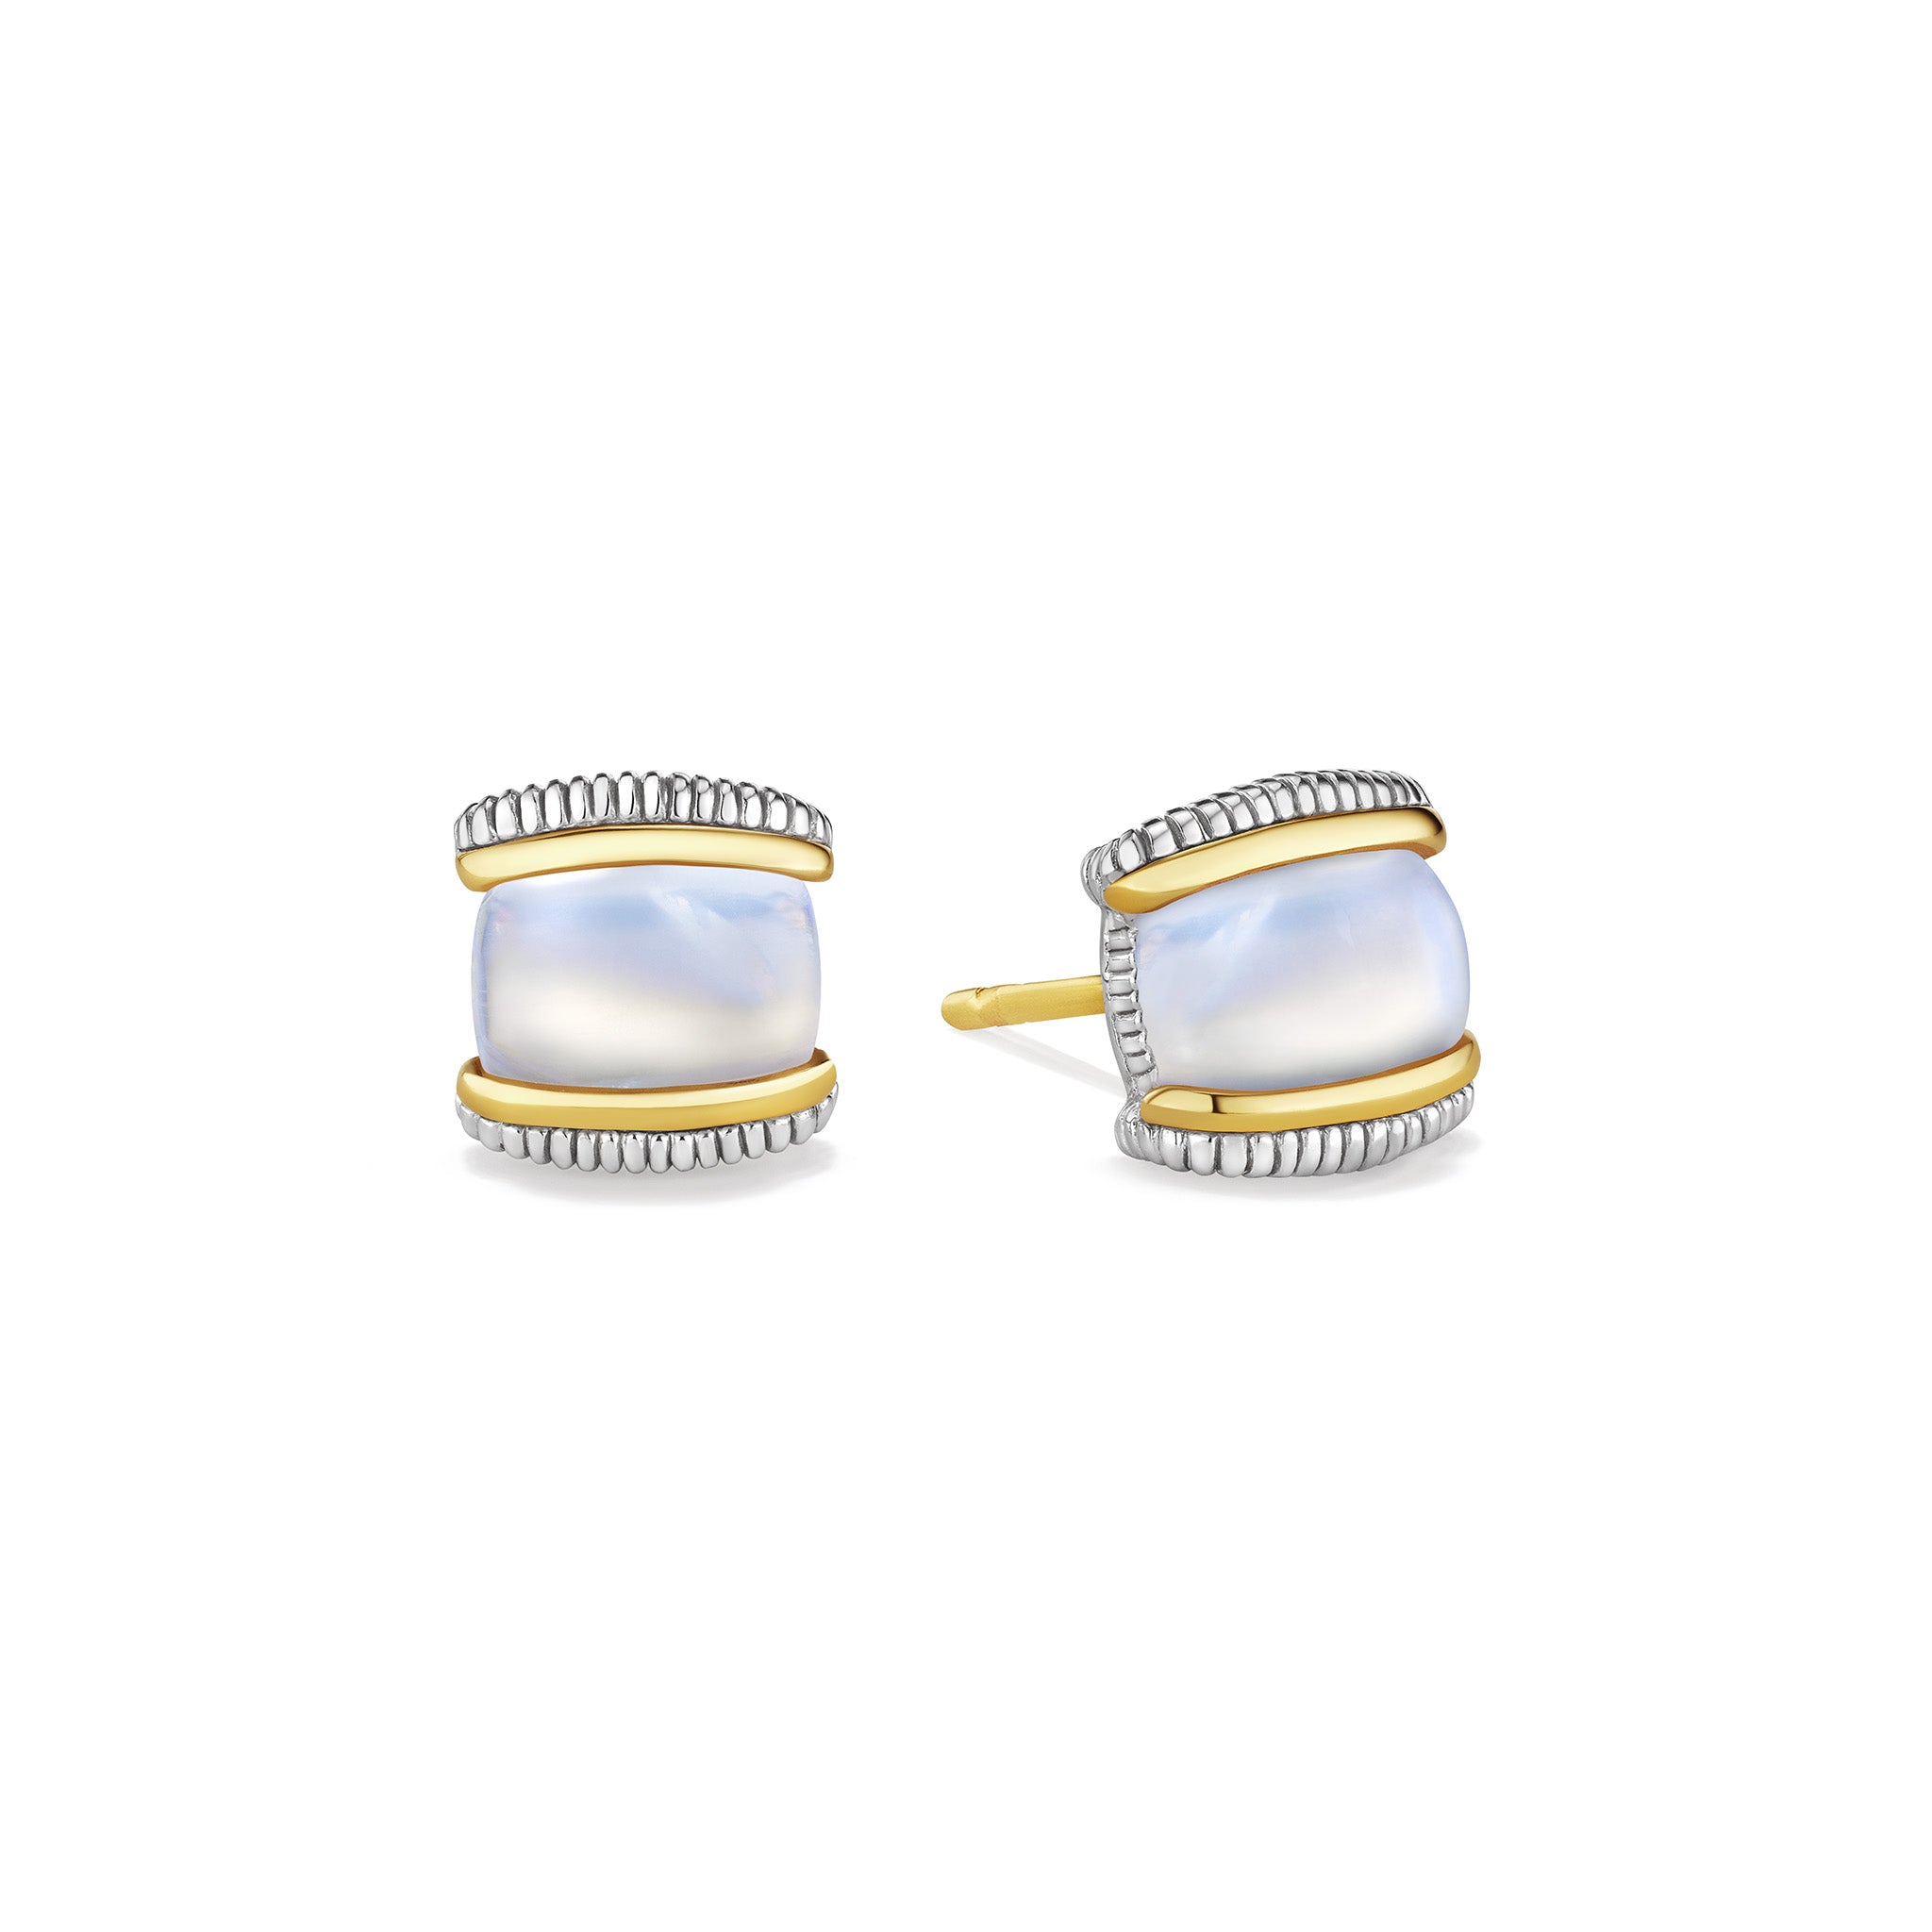 Eternity Stud Earrings With Rainbow Moonstone And 18K Gold